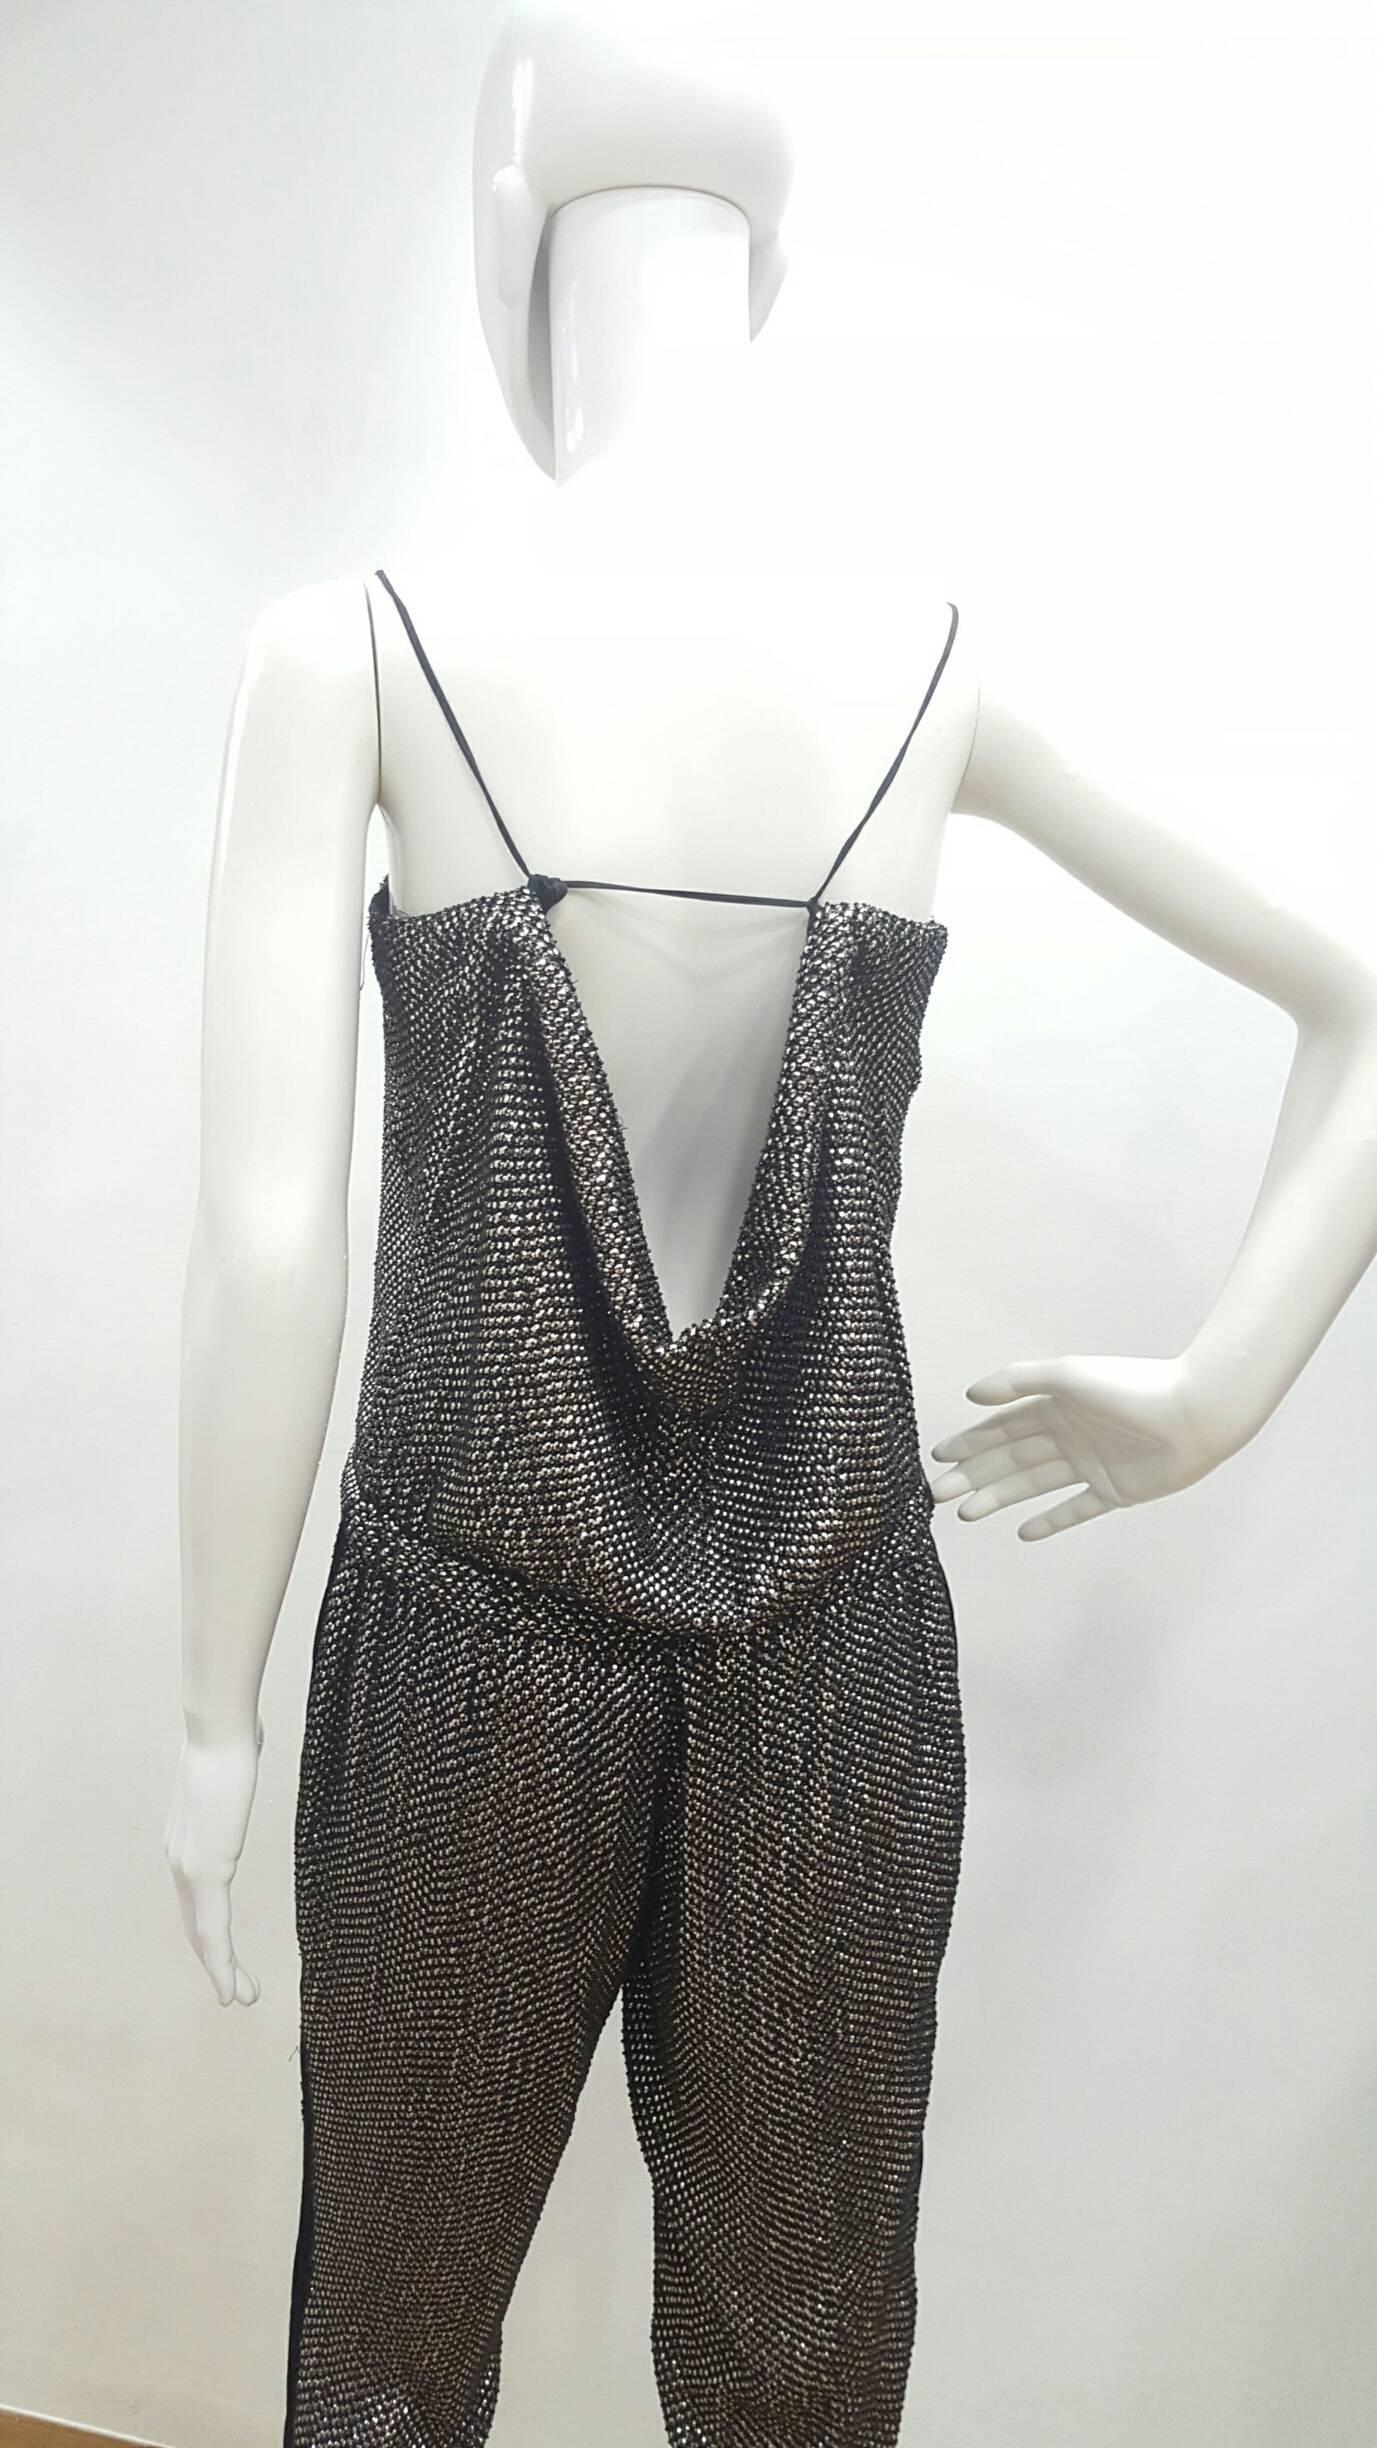 2000s Gucci All in one black with Swarovski crystals By Tom Ford
Already seen on Kylie Minogue 
Totally covered by Swarovski sequins and studs with pockets 
outlined with silk toulle 
Totally made in italy
in italian size range 38
Composition: